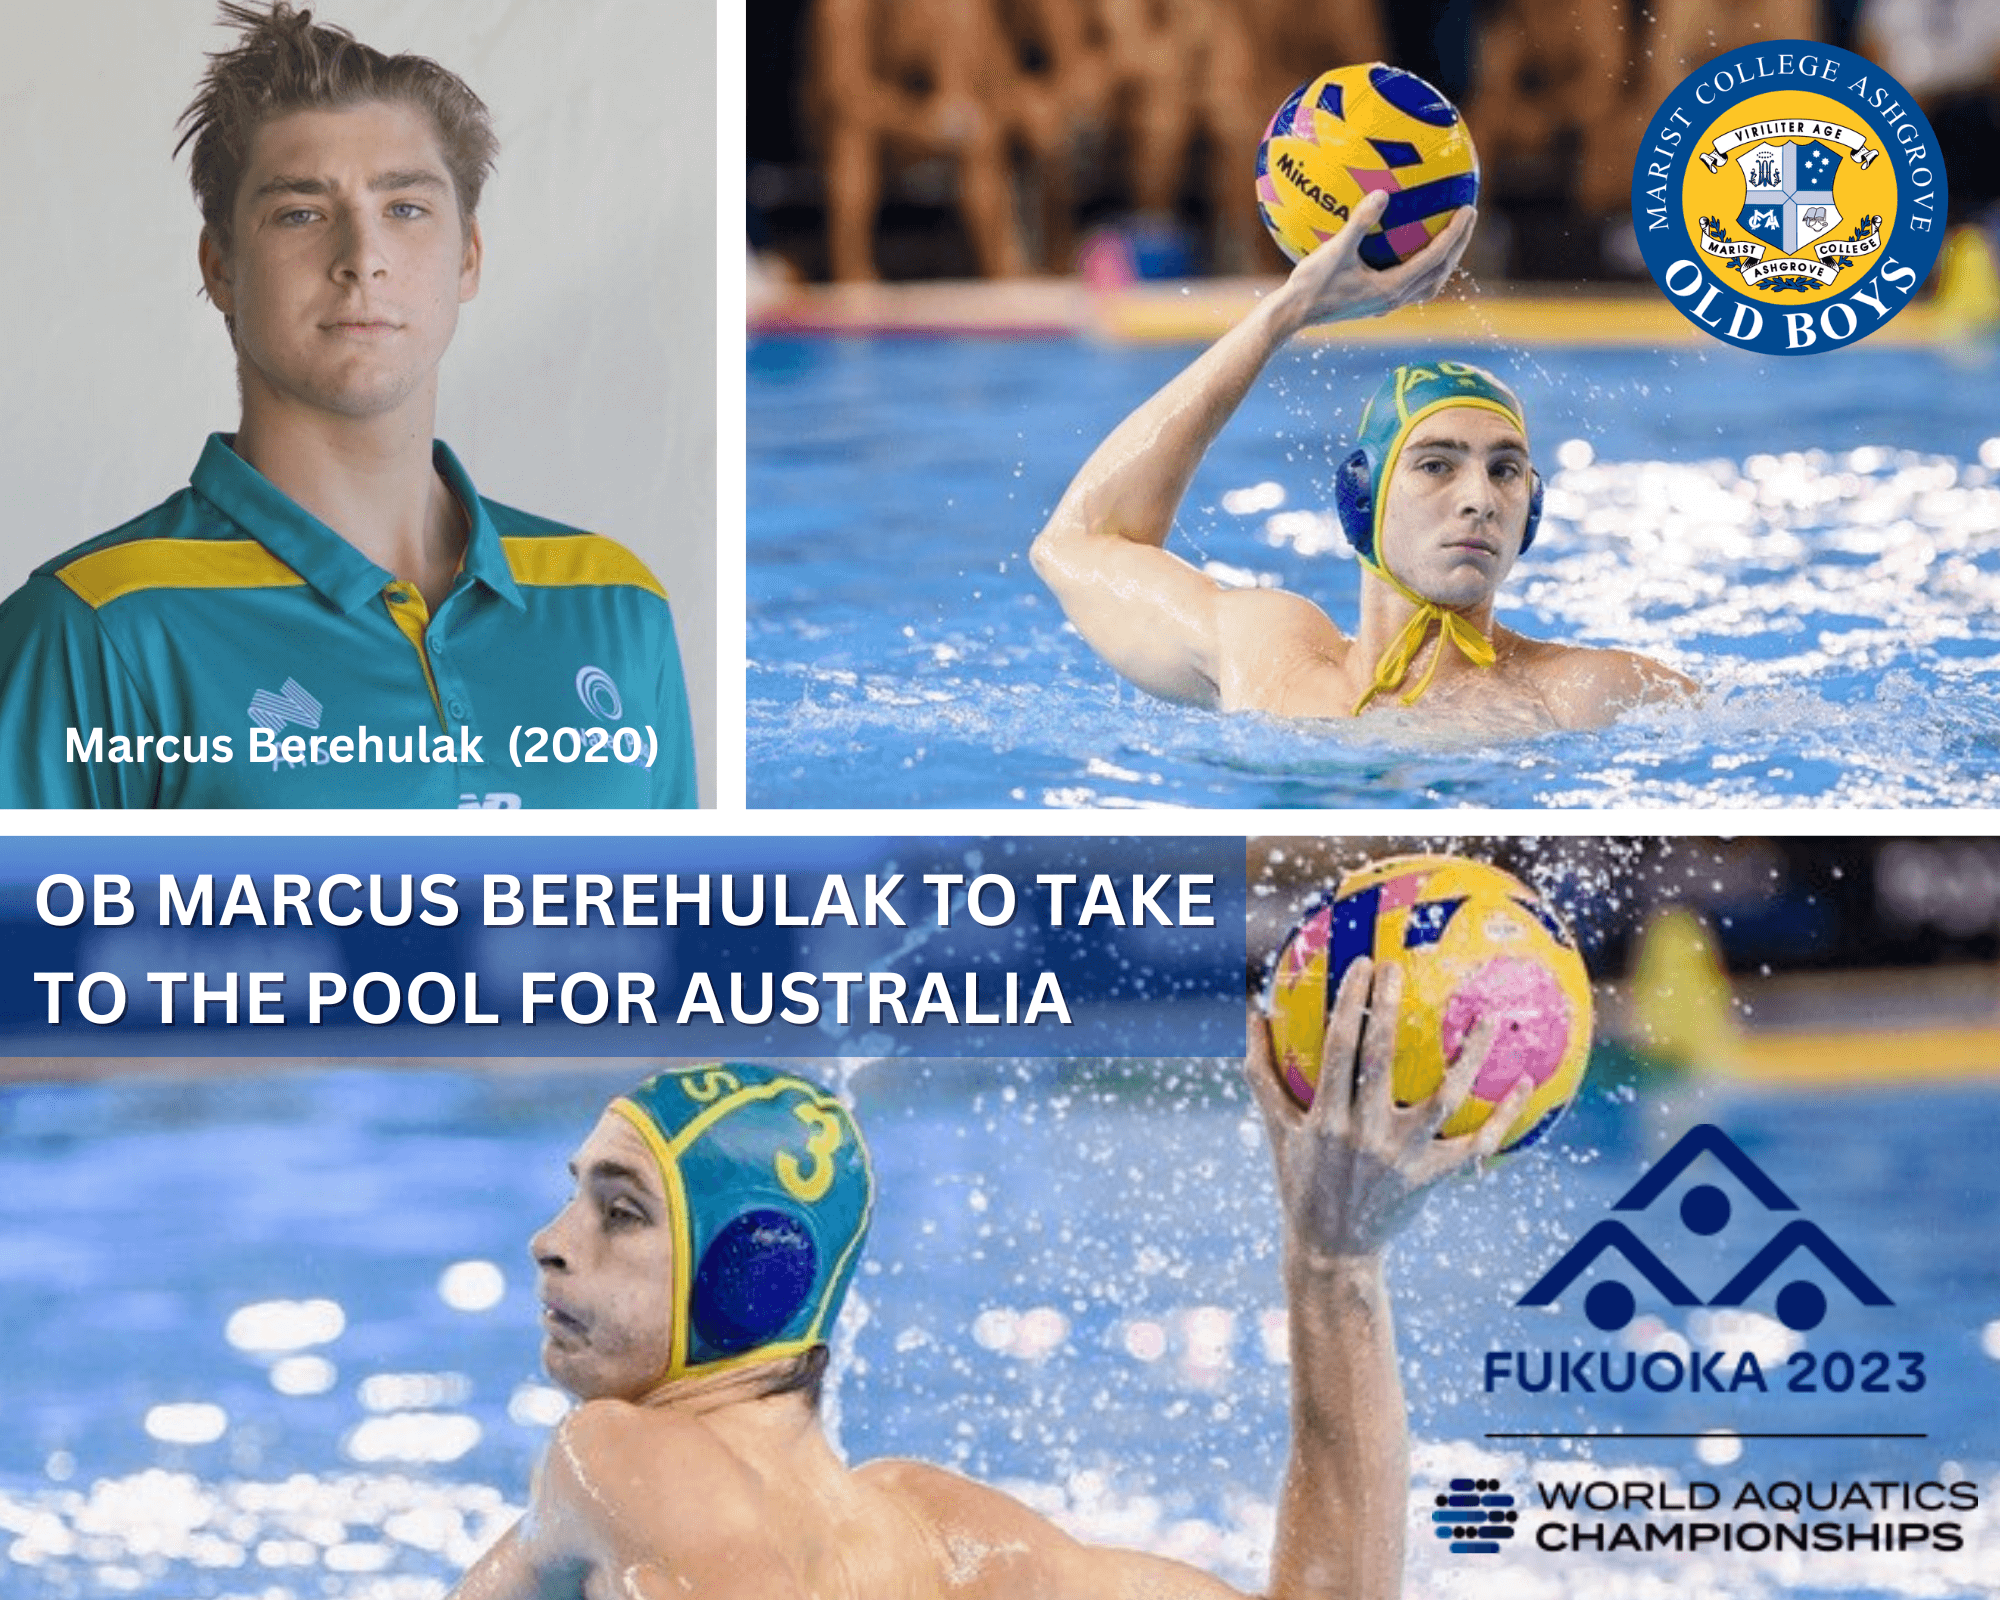 You are currently viewing OB Marcus Berehulak to Take to the Pool for Australia